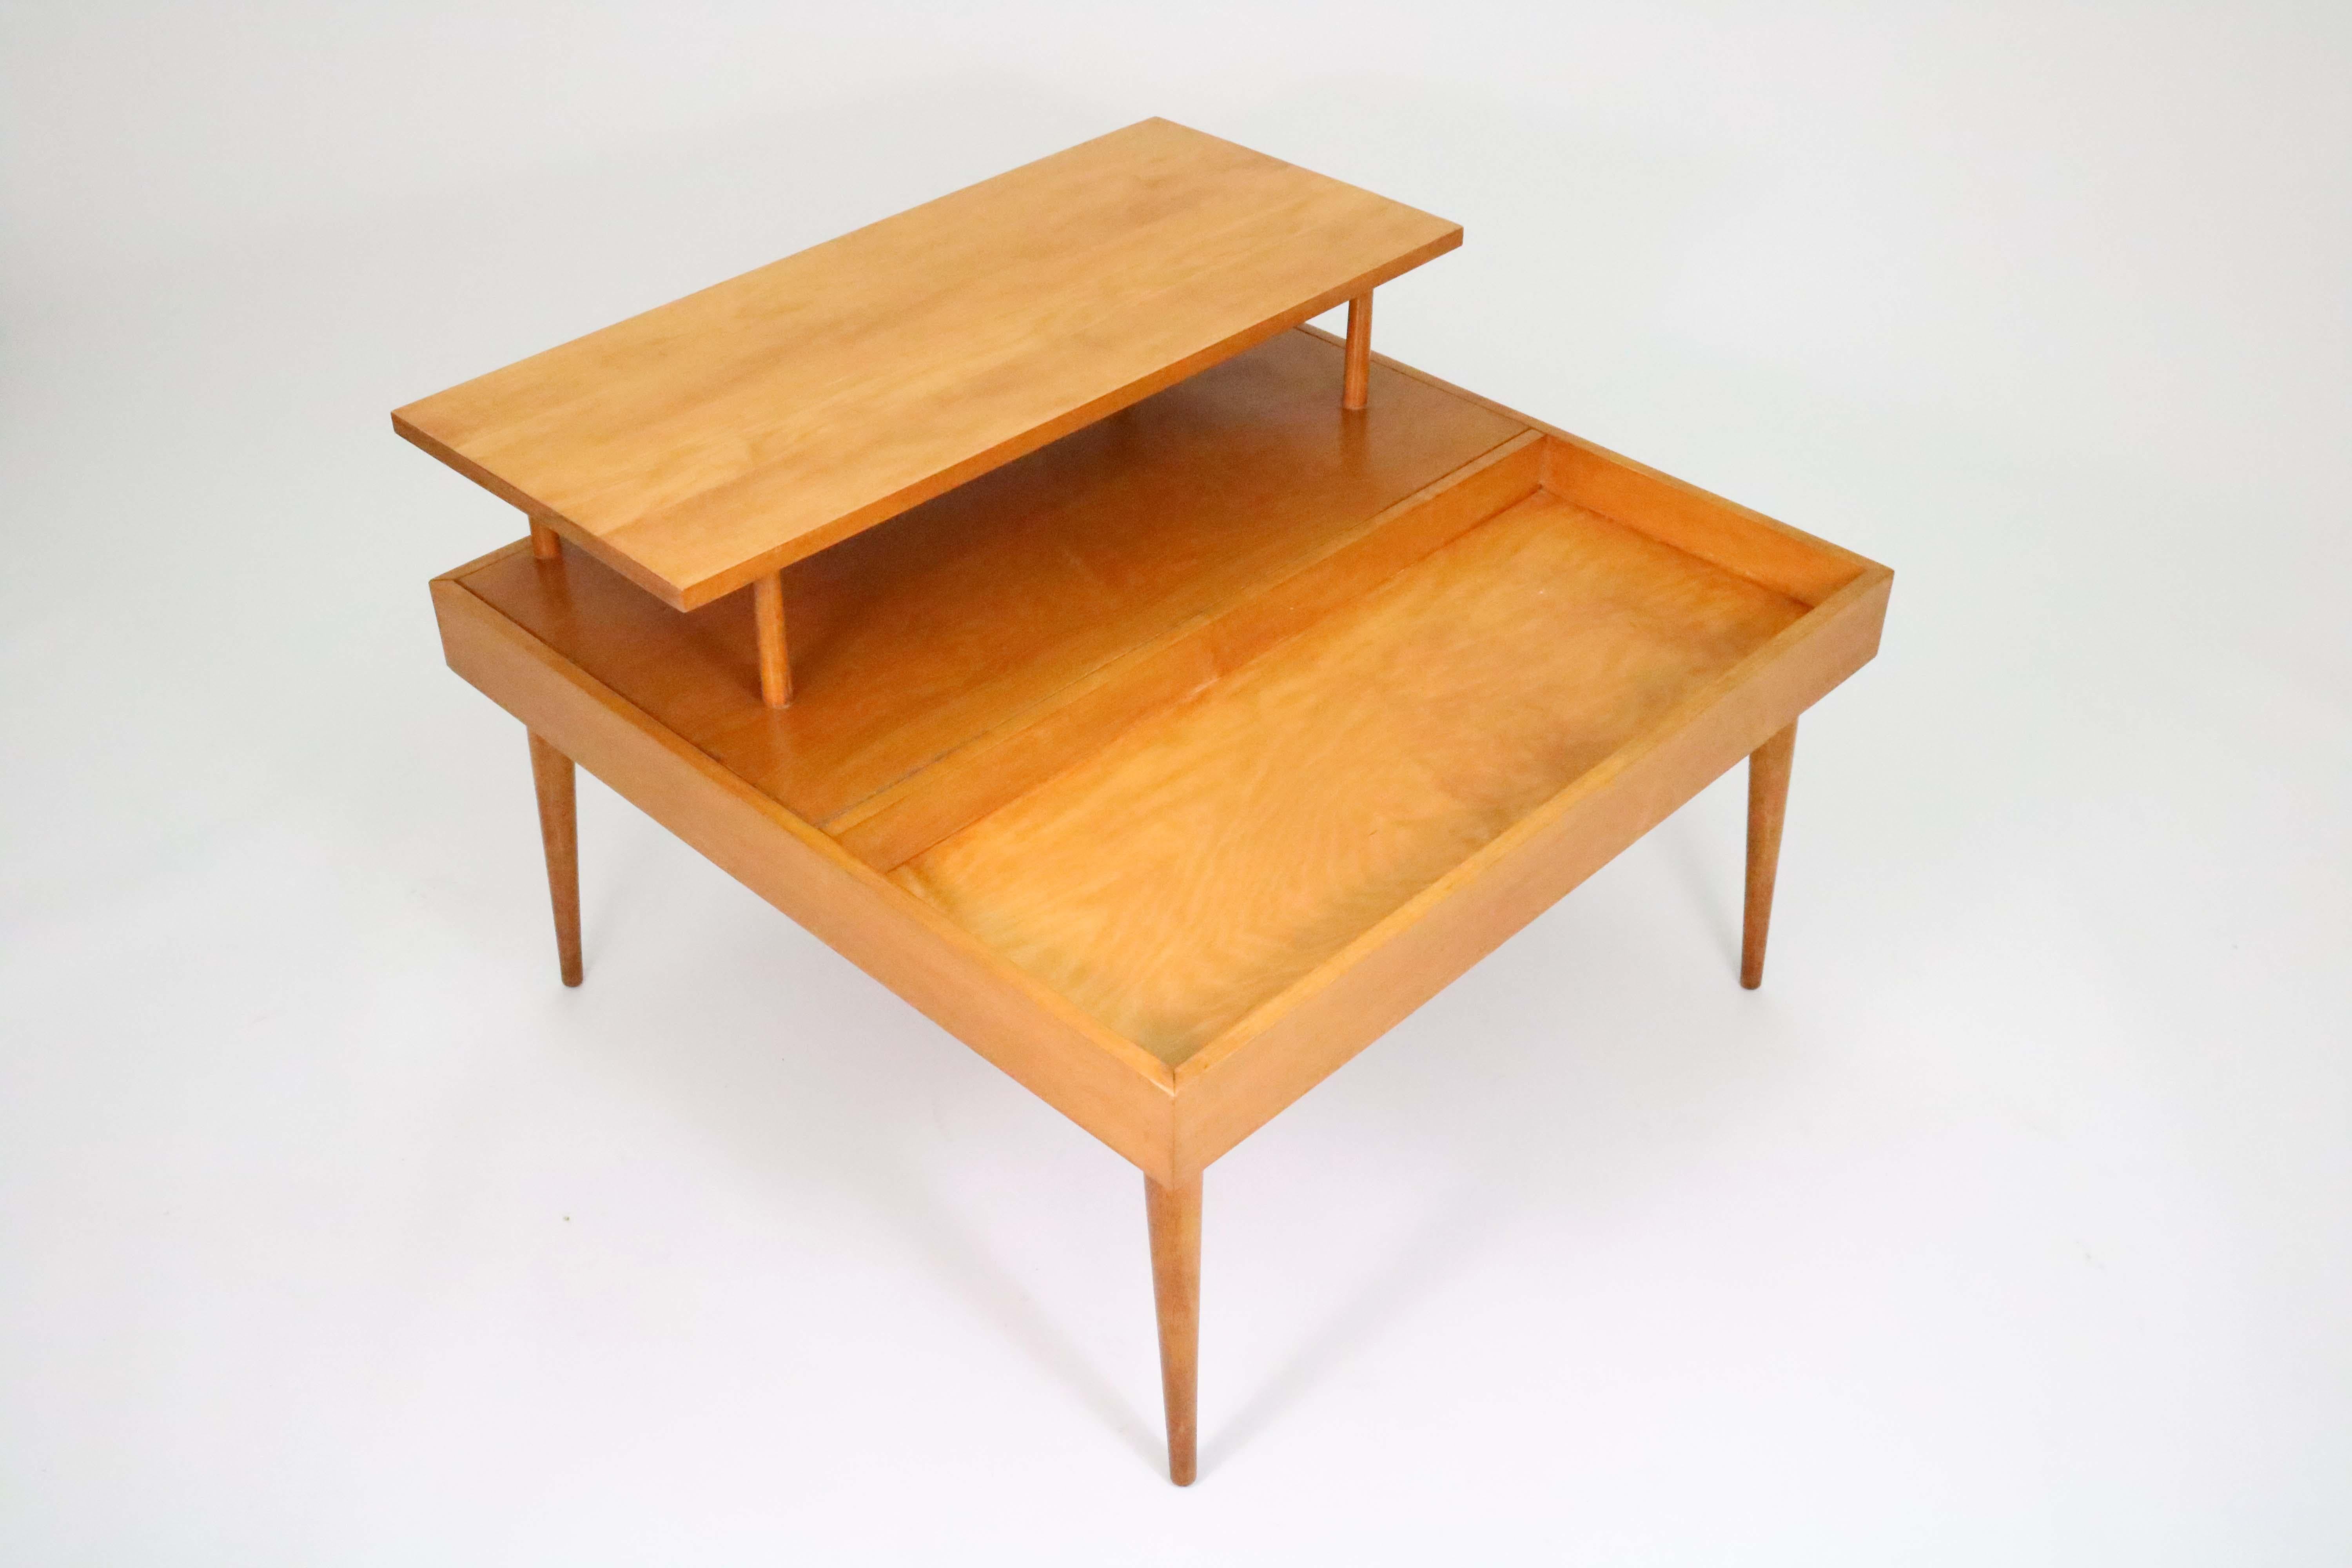 A rare Planner Group series side table by Paul McCobb for Winchendon in original saffron finish. 

